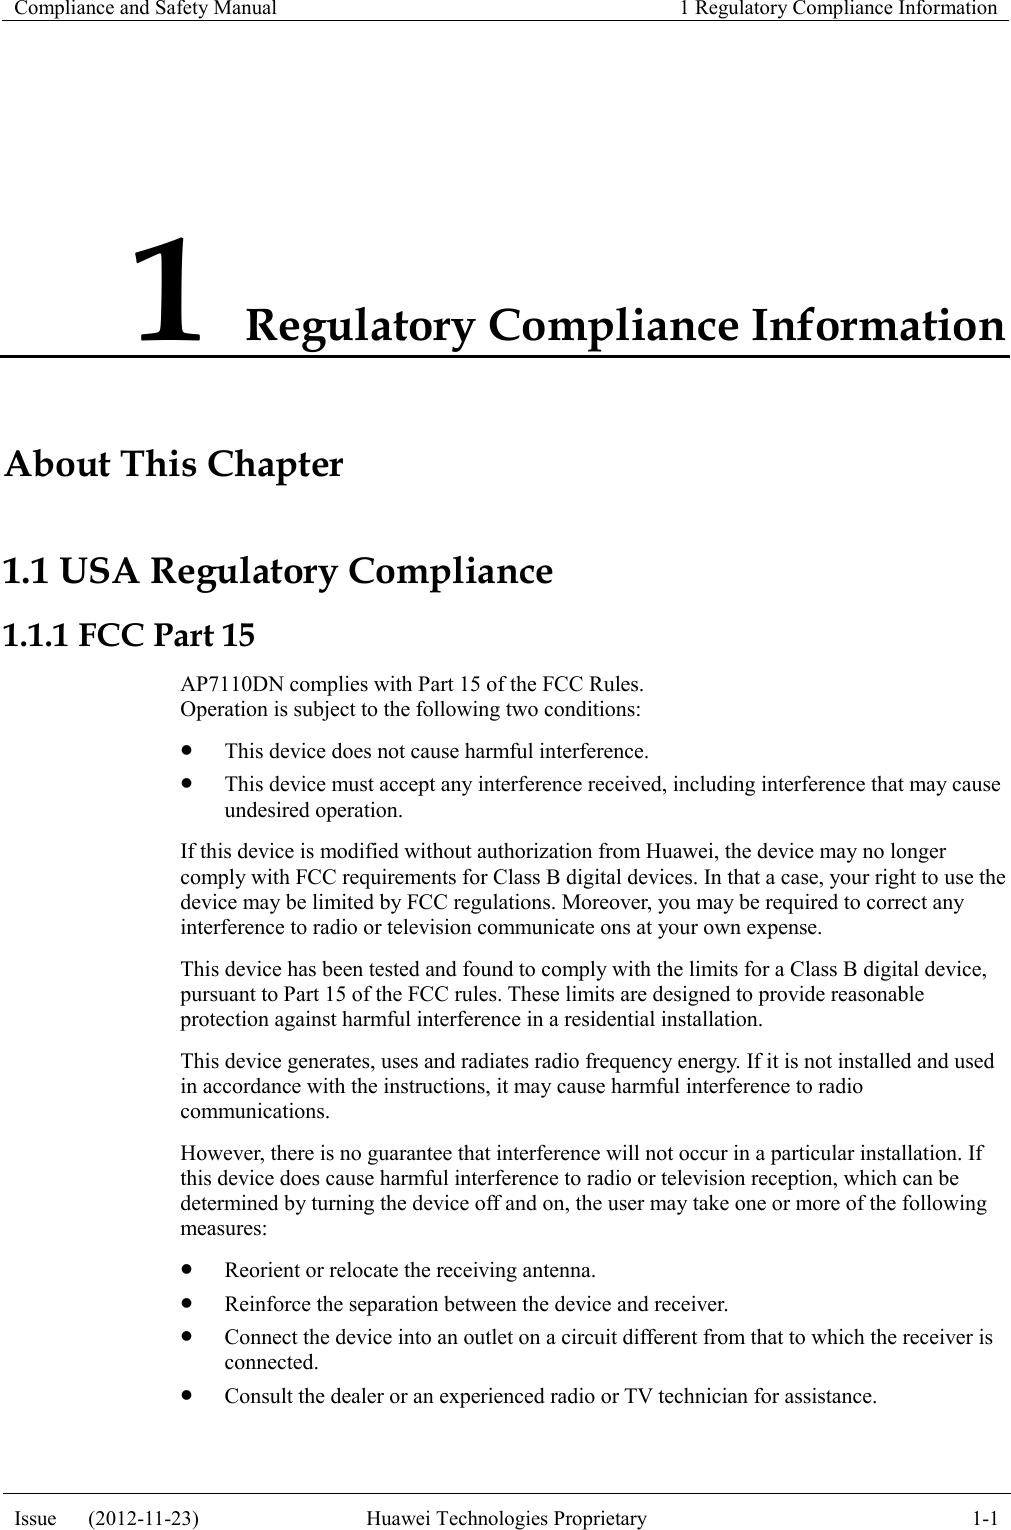 Compliance and Safety Manual 1 Regulatory Compliance Information  Issue      (2012-11-23) Huawei Technologies Proprietary 1-1  1 Regulatory Compliance Information About This Chapter 1.1 USA Regulatory Compliance 1.1.1 FCC Part 15 AP7110DN complies with Part 15 of the FCC Rules. Operation is subject to the following two conditions:  This device does not cause harmful interference.  This device must accept any interference received, including interference that may cause undesired operation. If this device is modified without authorization from Huawei, the device may no longer comply with FCC requirements for Class B digital devices. In that a case, your right to use the device may be limited by FCC regulations. Moreover, you may be required to correct any interference to radio or television communicate ons at your own expense. This device has been tested and found to comply with the limits for a Class B digital device, pursuant to Part 15 of the FCC rules. These limits are designed to provide reasonable protection against harmful interference in a residential installation. This device generates, uses and radiates radio frequency energy. If it is not installed and used in accordance with the instructions, it may cause harmful interference to radio communications. However, there is no guarantee that interference will not occur in a particular installation. If this device does cause harmful interference to radio or television reception, which can be determined by turning the device off and on, the user may take one or more of the following measures:  Reorient or relocate the receiving antenna.  Reinforce the separation between the device and receiver.  Connect the device into an outlet on a circuit different from that to which the receiver is connected.  Consult the dealer or an experienced radio or TV technician for assistance. 